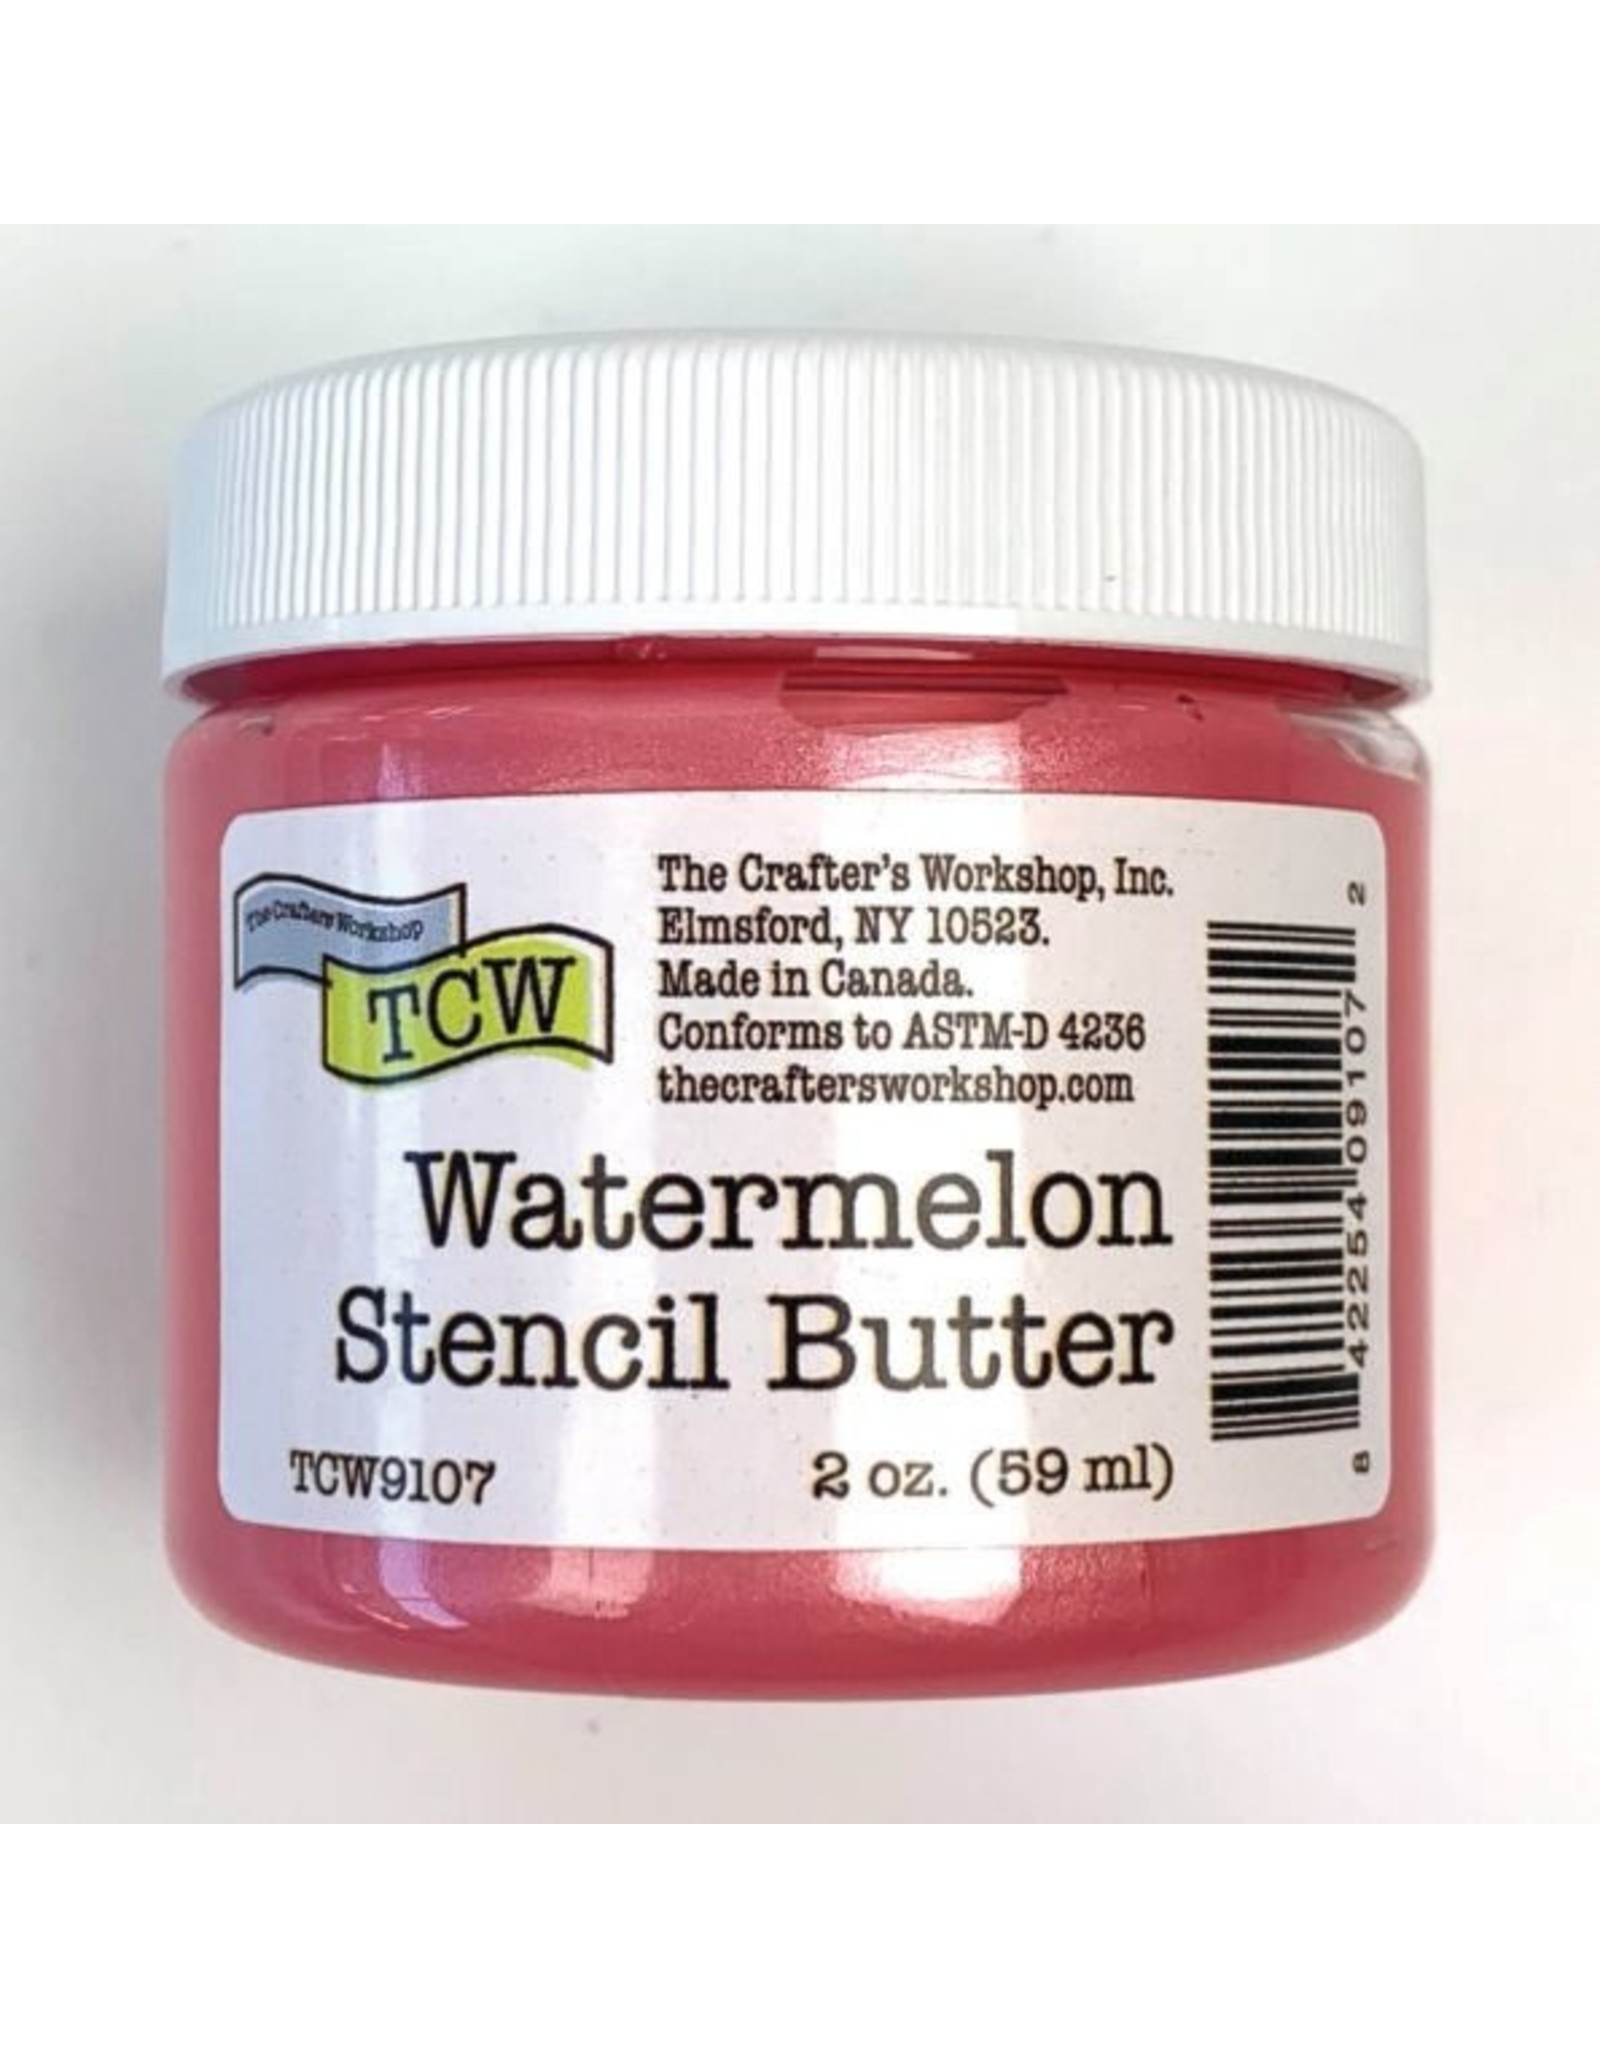 THE CRAFTERS WORKSHOP Stencil Butter 2 oz. - Watermelon